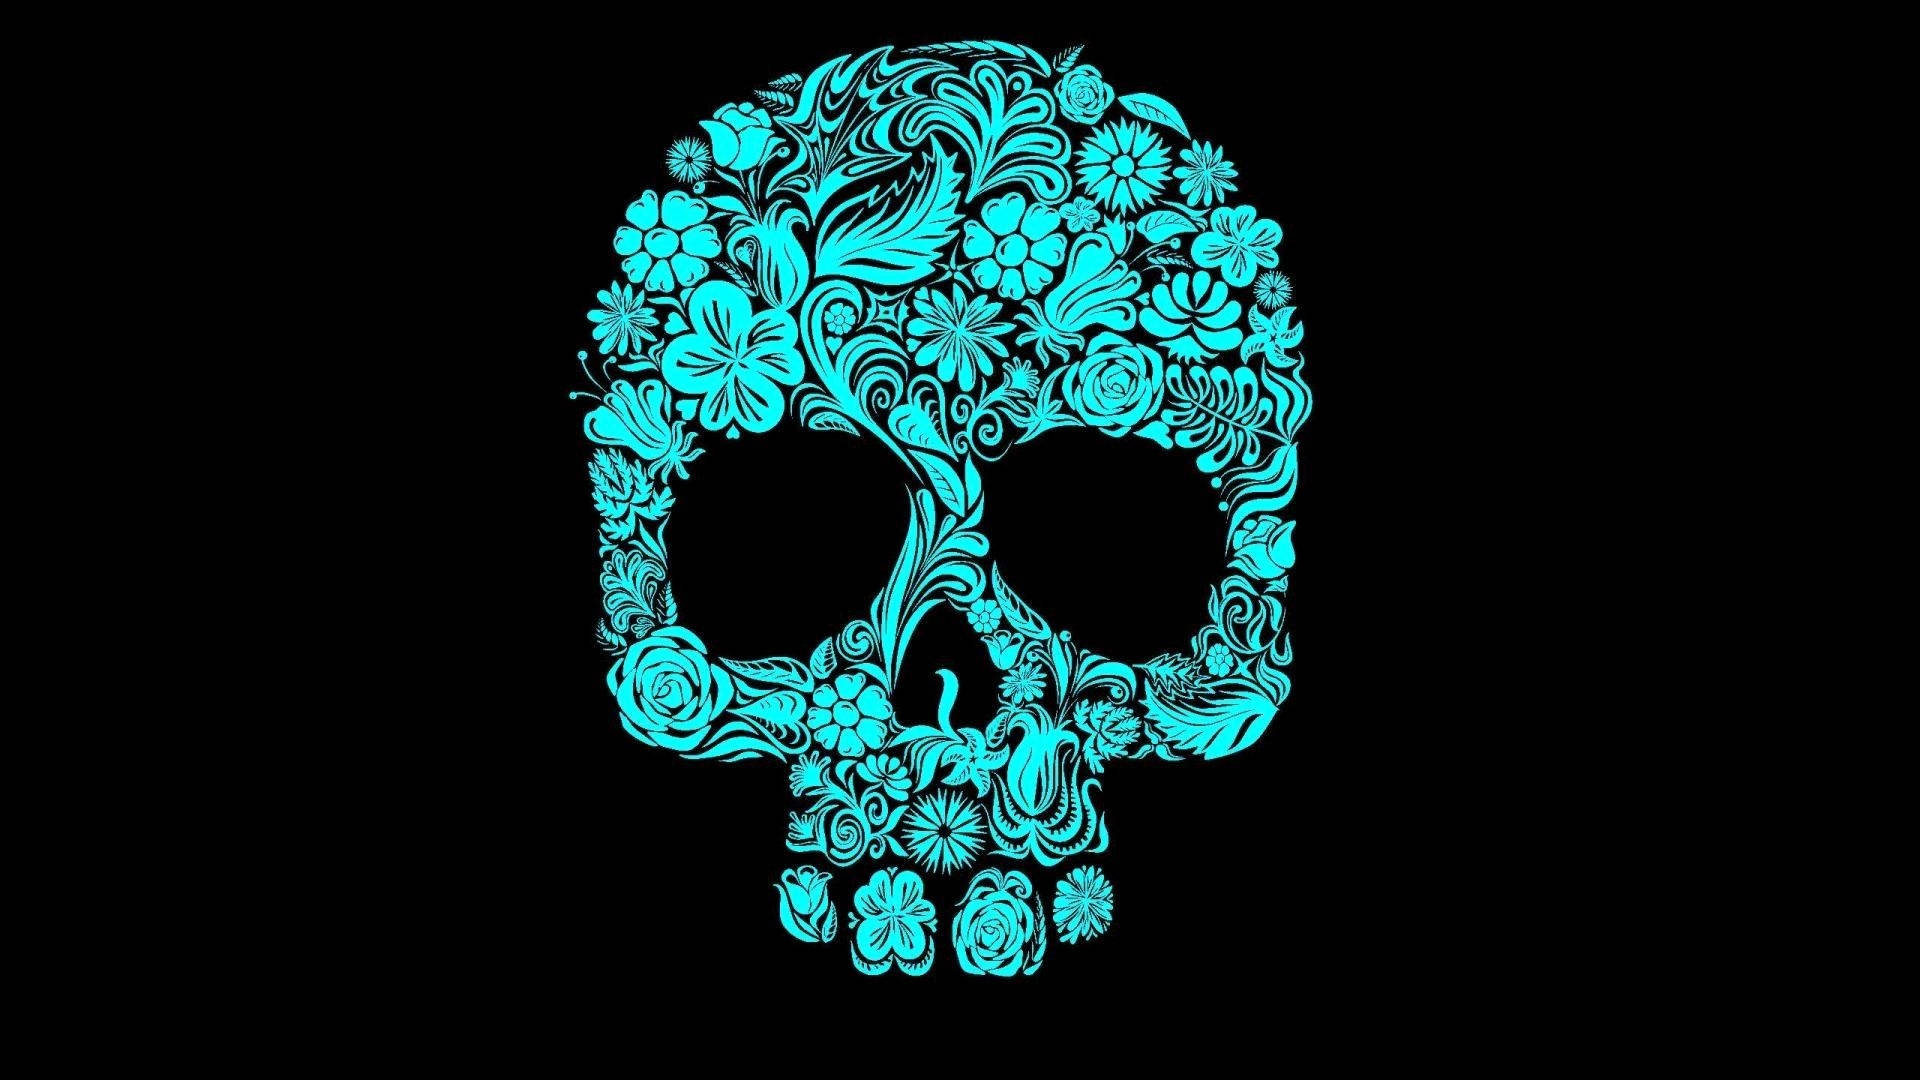 A Blue Skull With Floral Designs On A Black Background Background